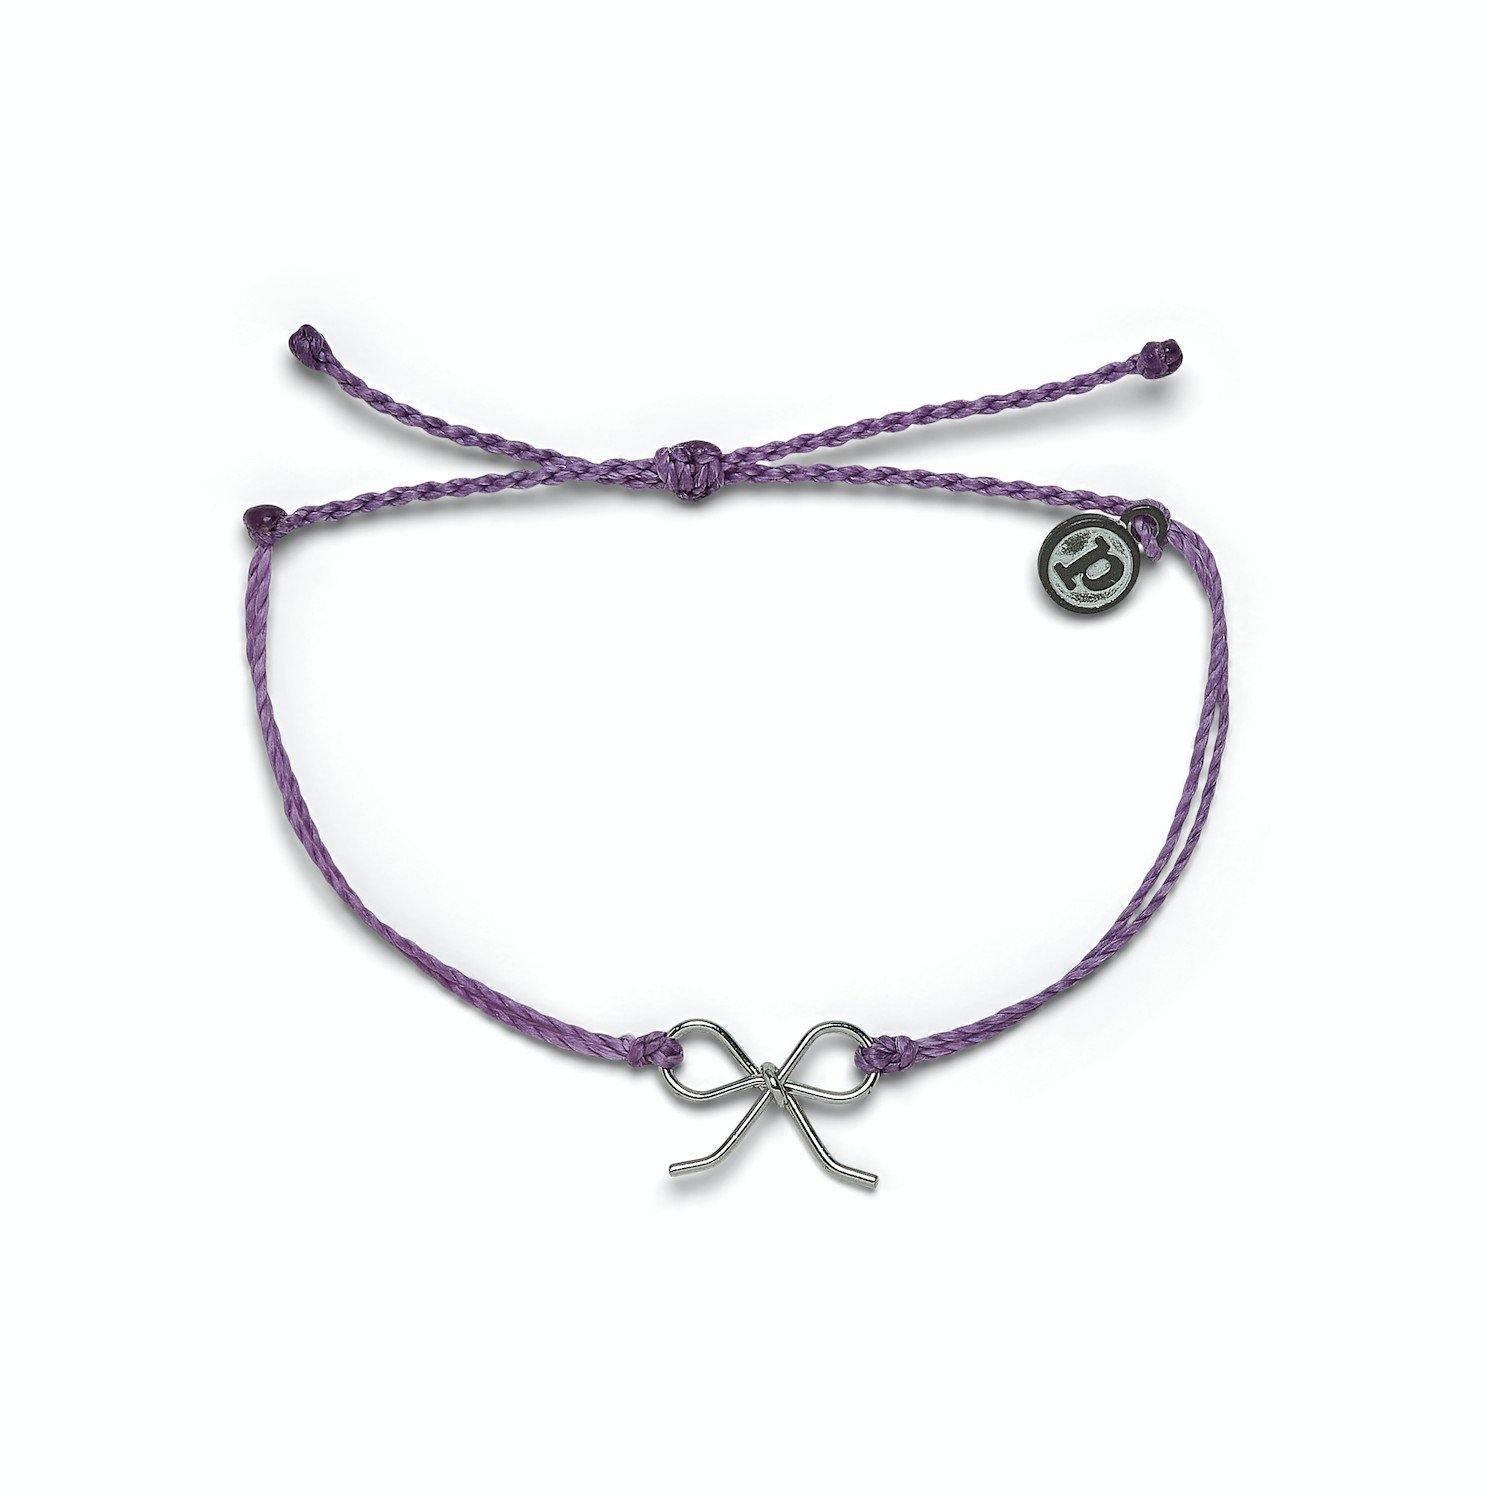 Fall 2021 Bracelets - The Salty Mare